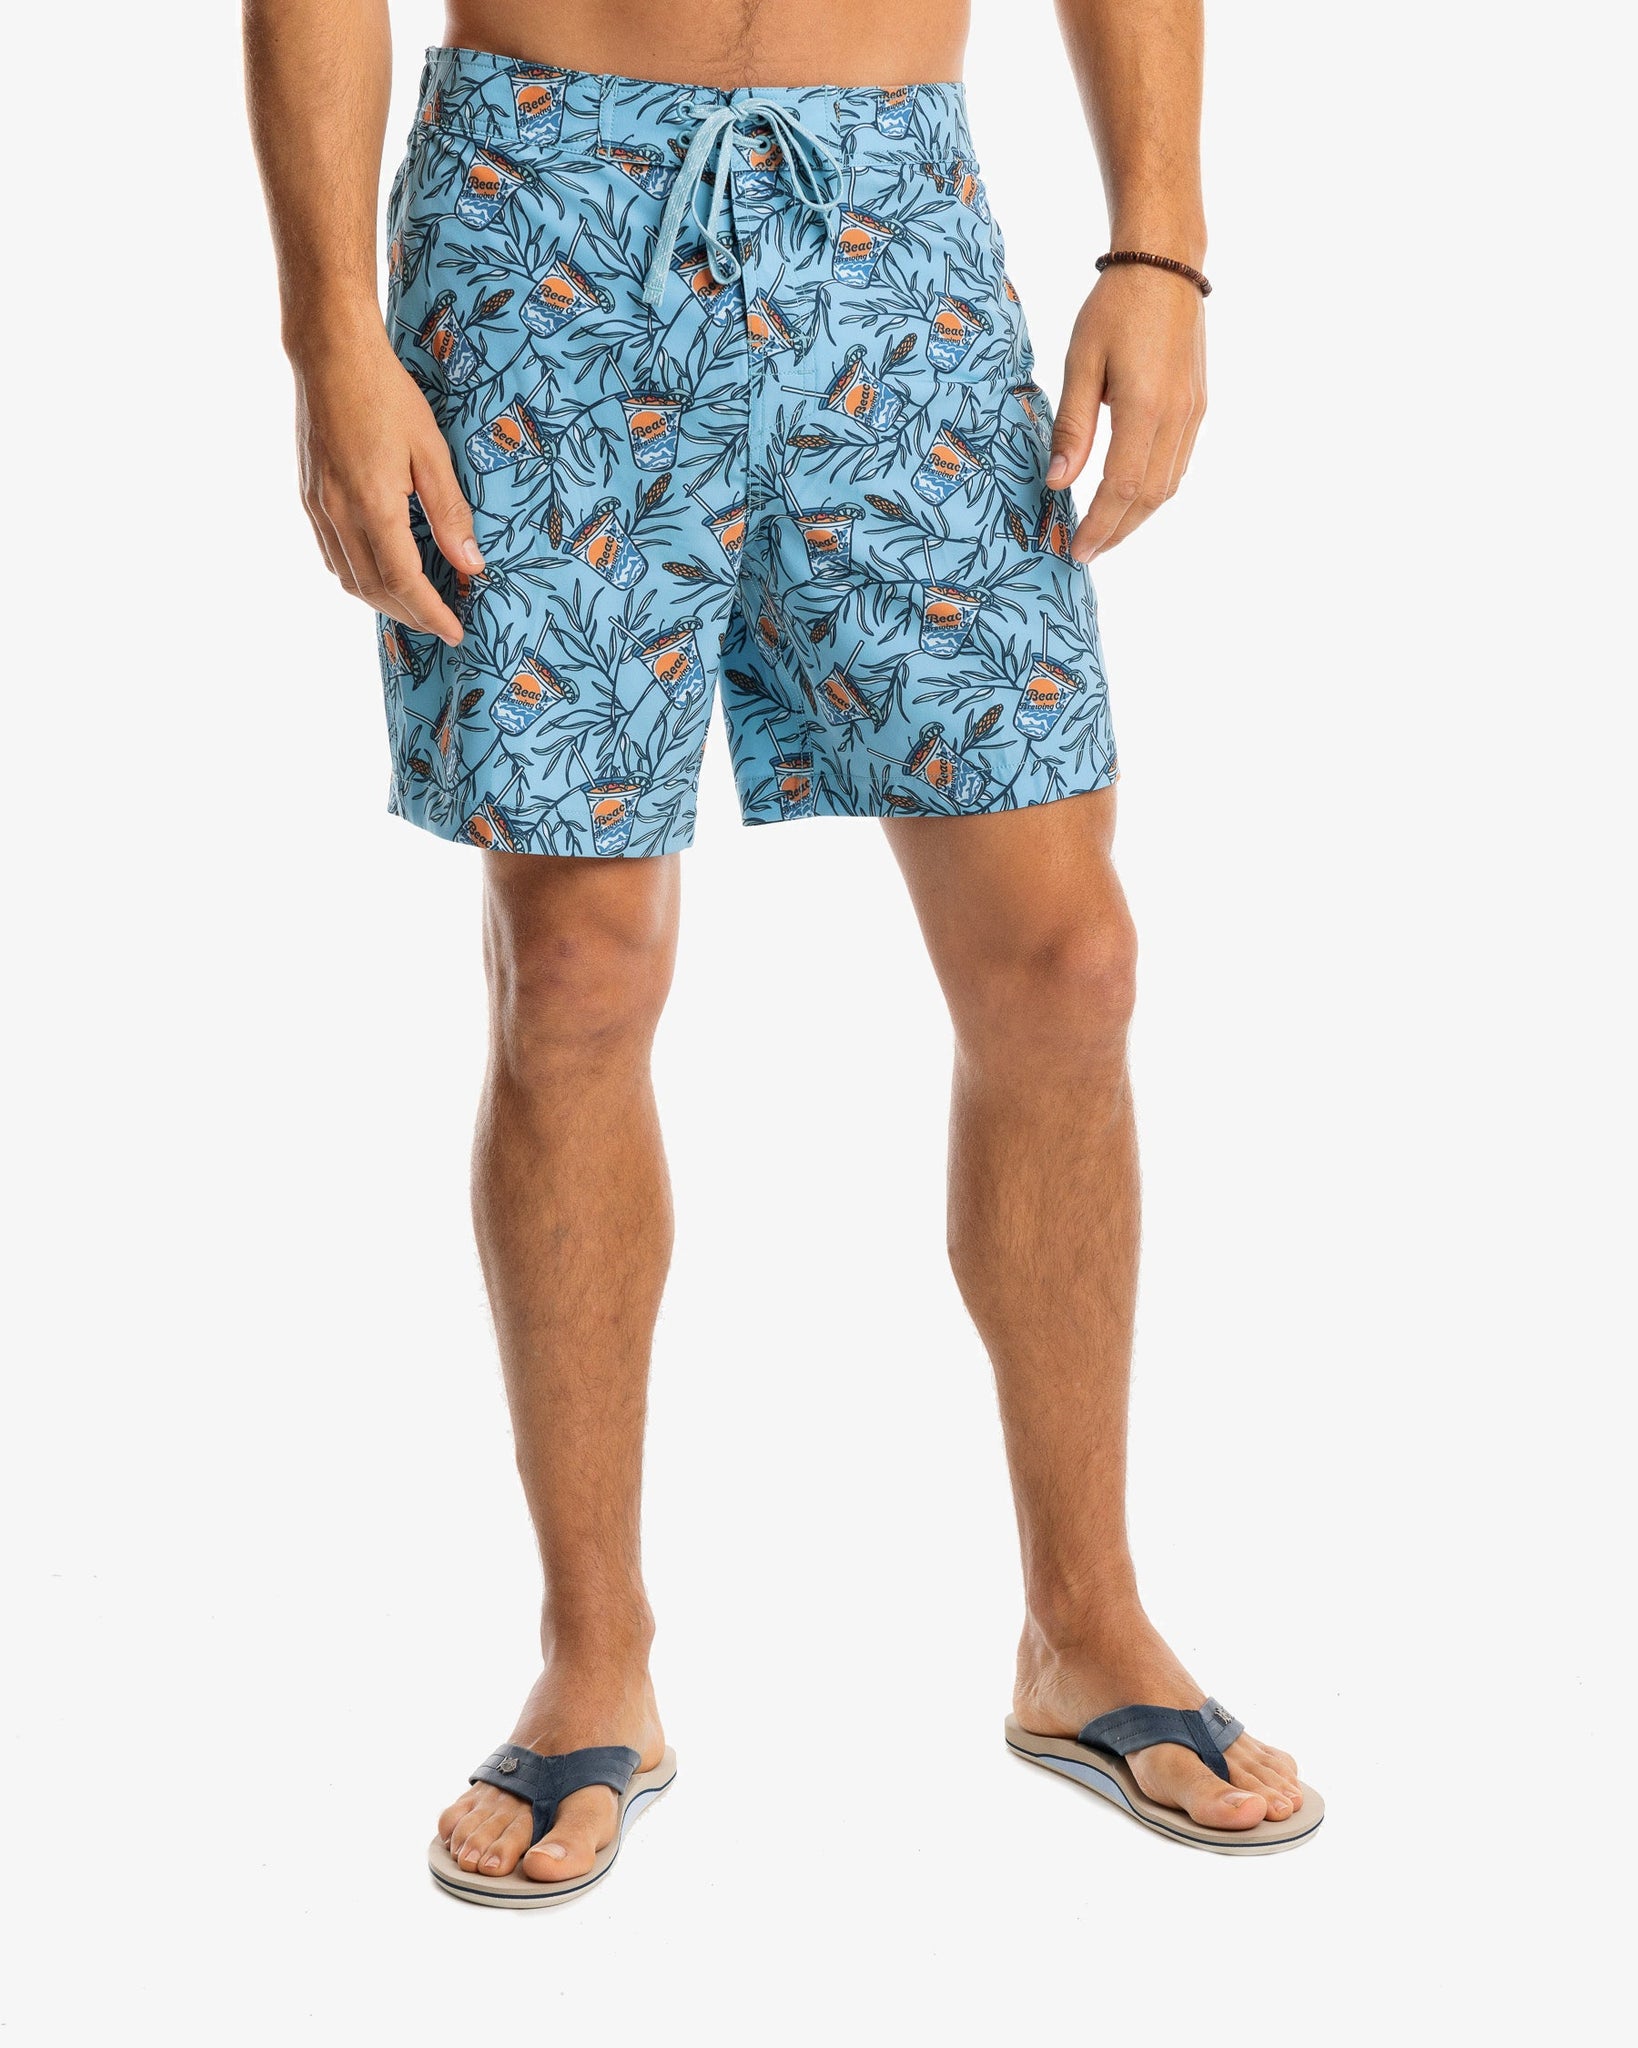 The front view of the Men's Botanical Beverage Swim Short by Southern Tide - Low Tide Blue